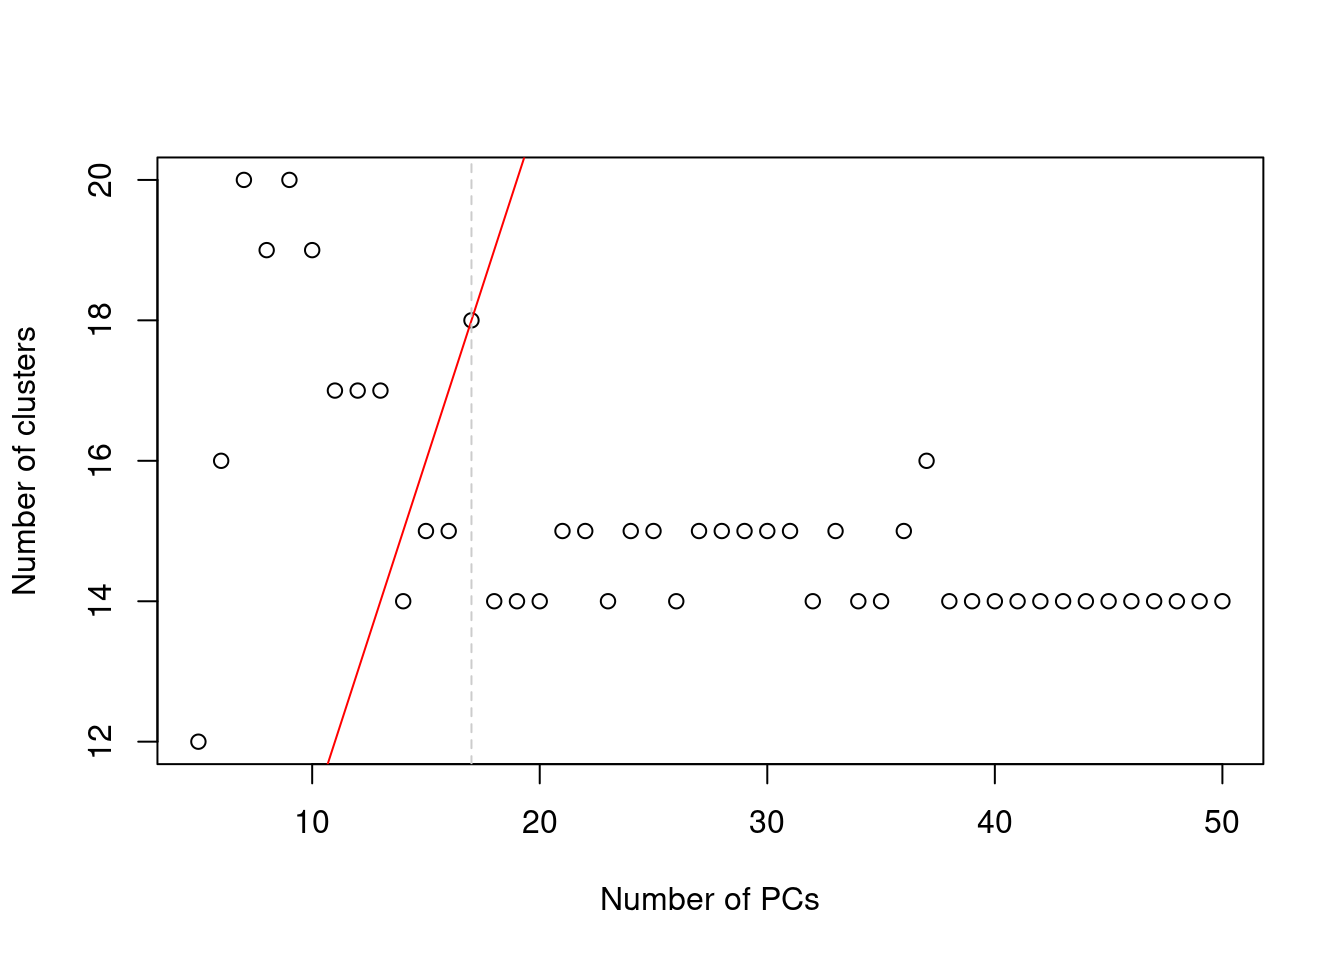 Number of clusters detected in the Zeisel brain dataset as a function of the number of PCs. The red unbroken line represents the theoretical upper constraint on the number of clusters, while the grey dashed line is the number of PCs suggested by `getClusteredPCs()`.